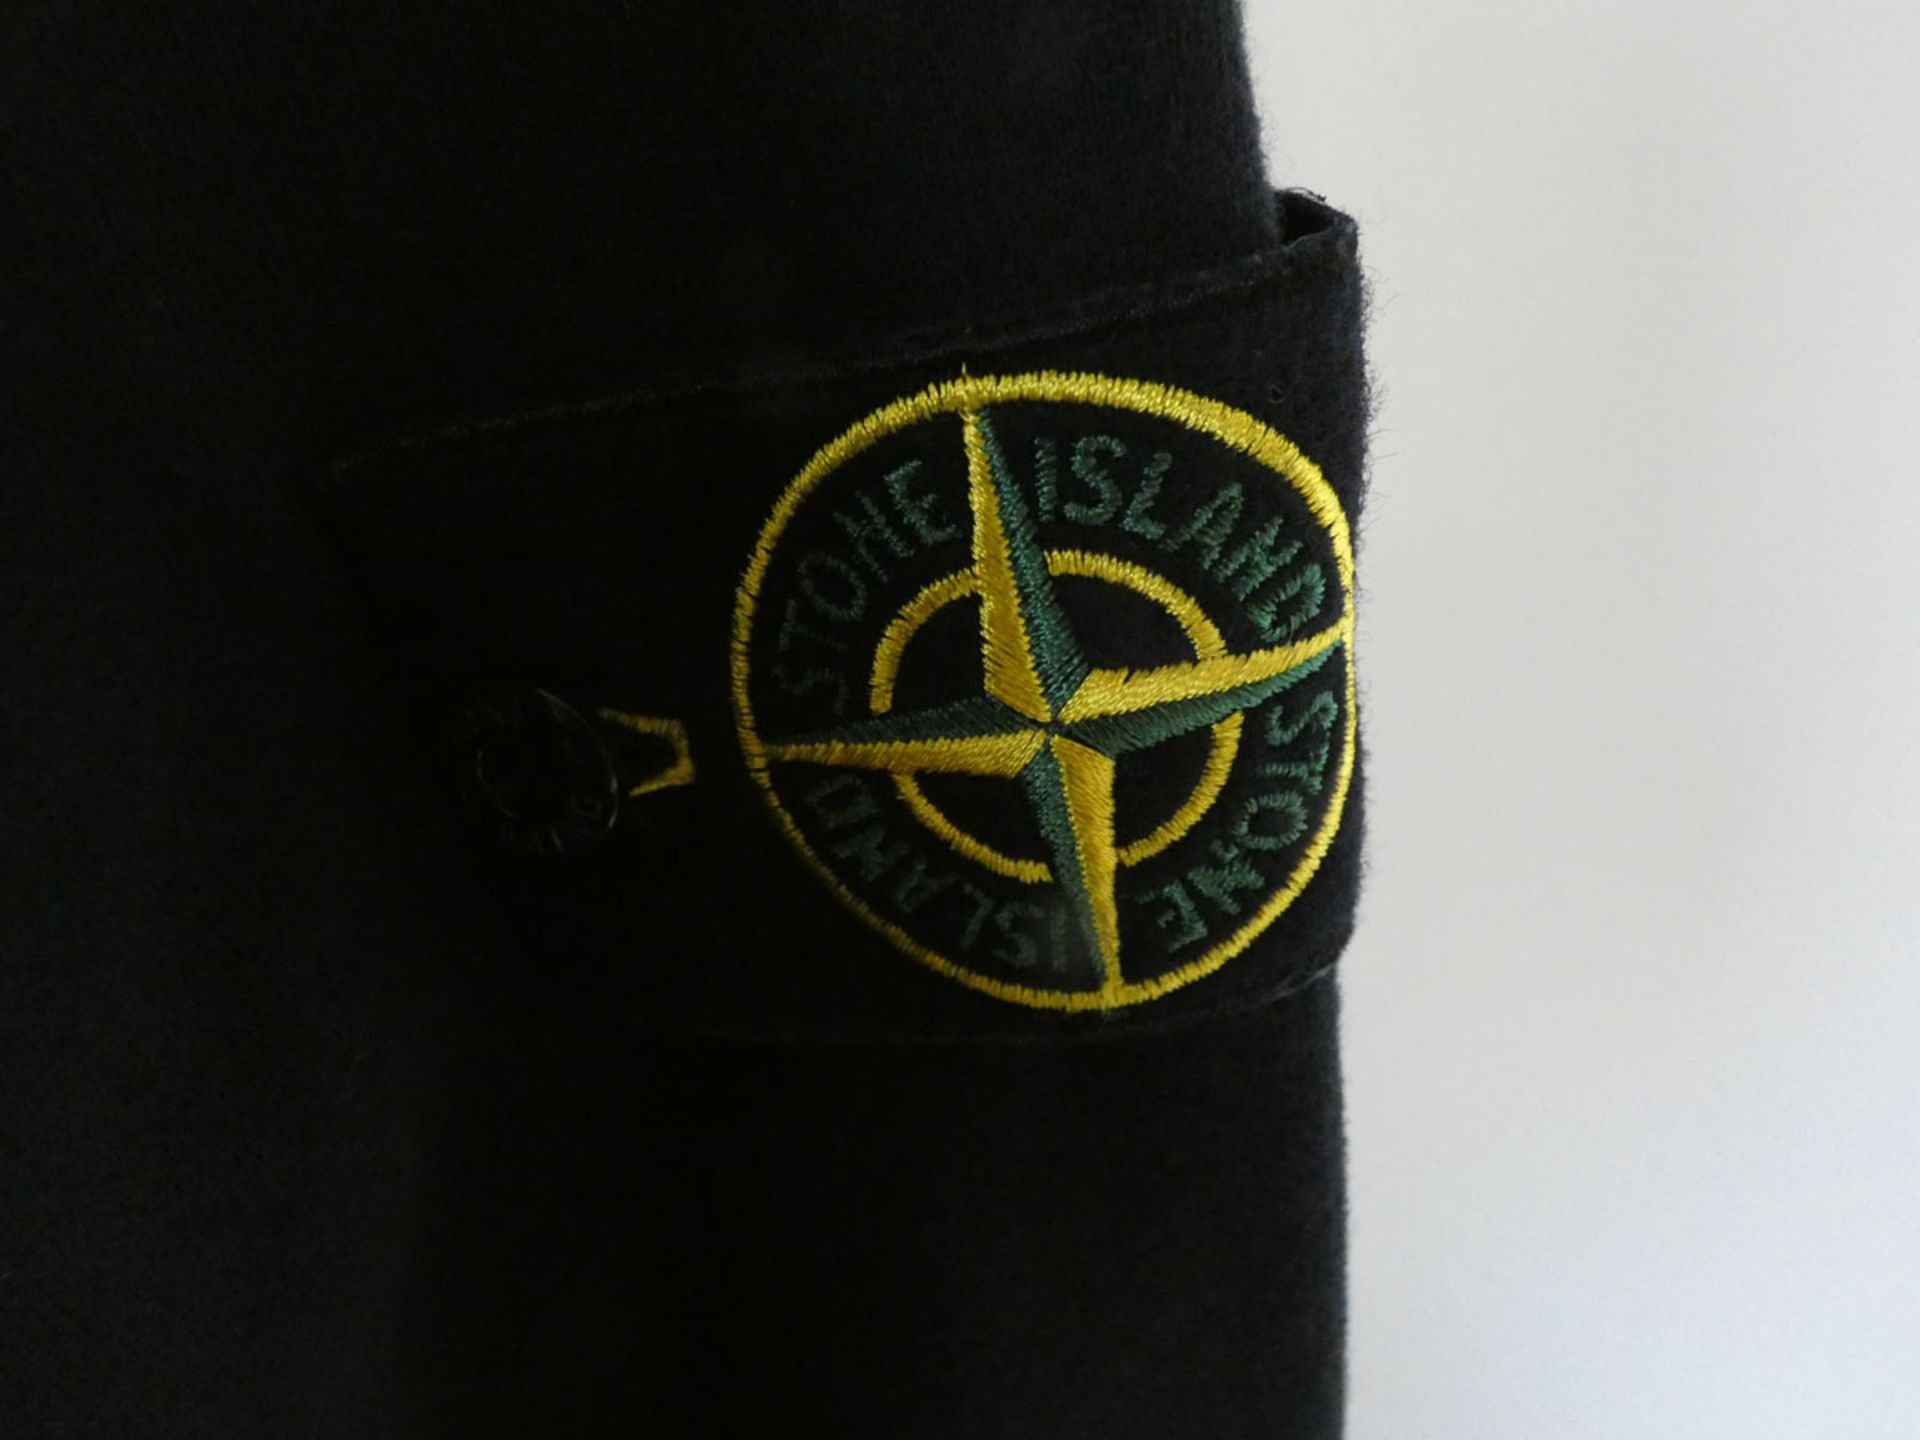 Stone Island men's navy sweater size XL (Mannequin not included) - Image 2 of 3